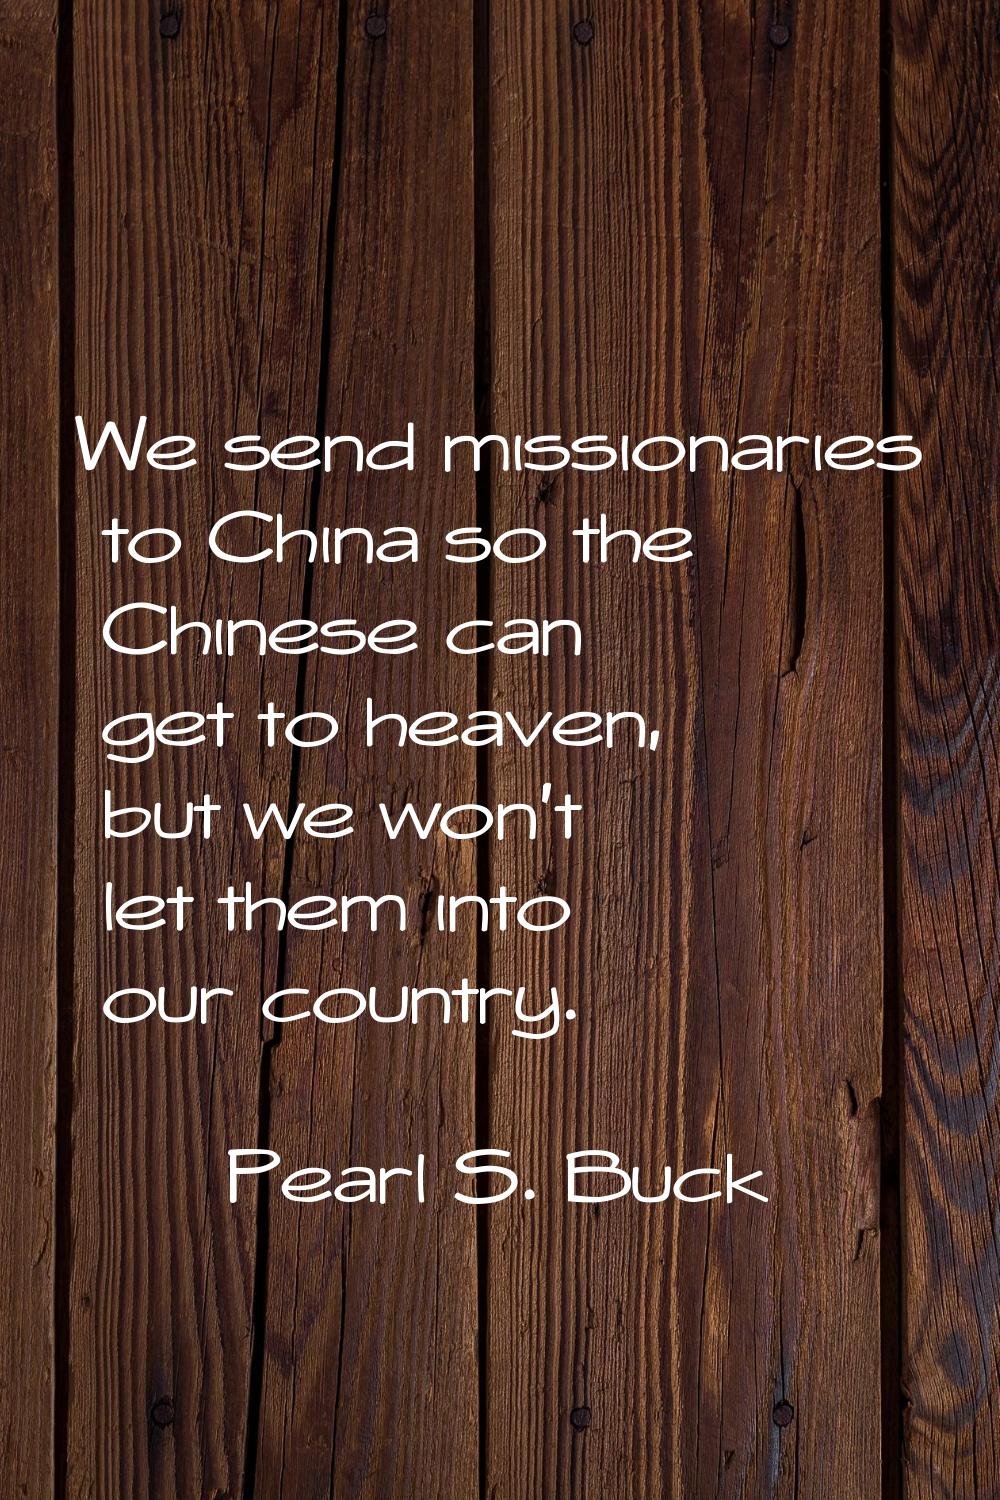 We send missionaries to China so the Chinese can get to heaven, but we won't let them into our coun